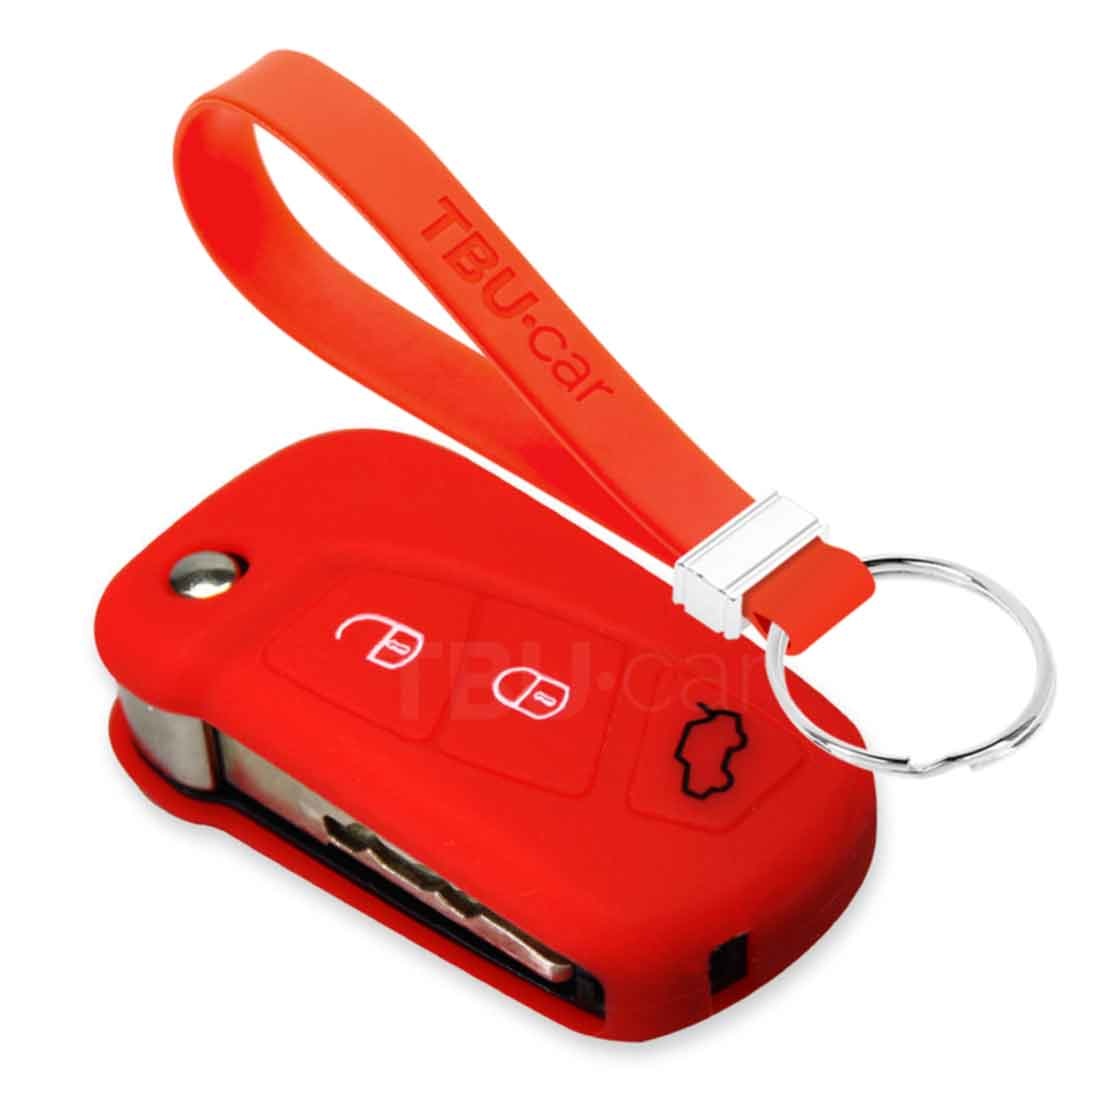 TBU car TBU car Car key cover compatible with Ford - Silicone Protective Remote Key Shell - FOB Case Cover - Red